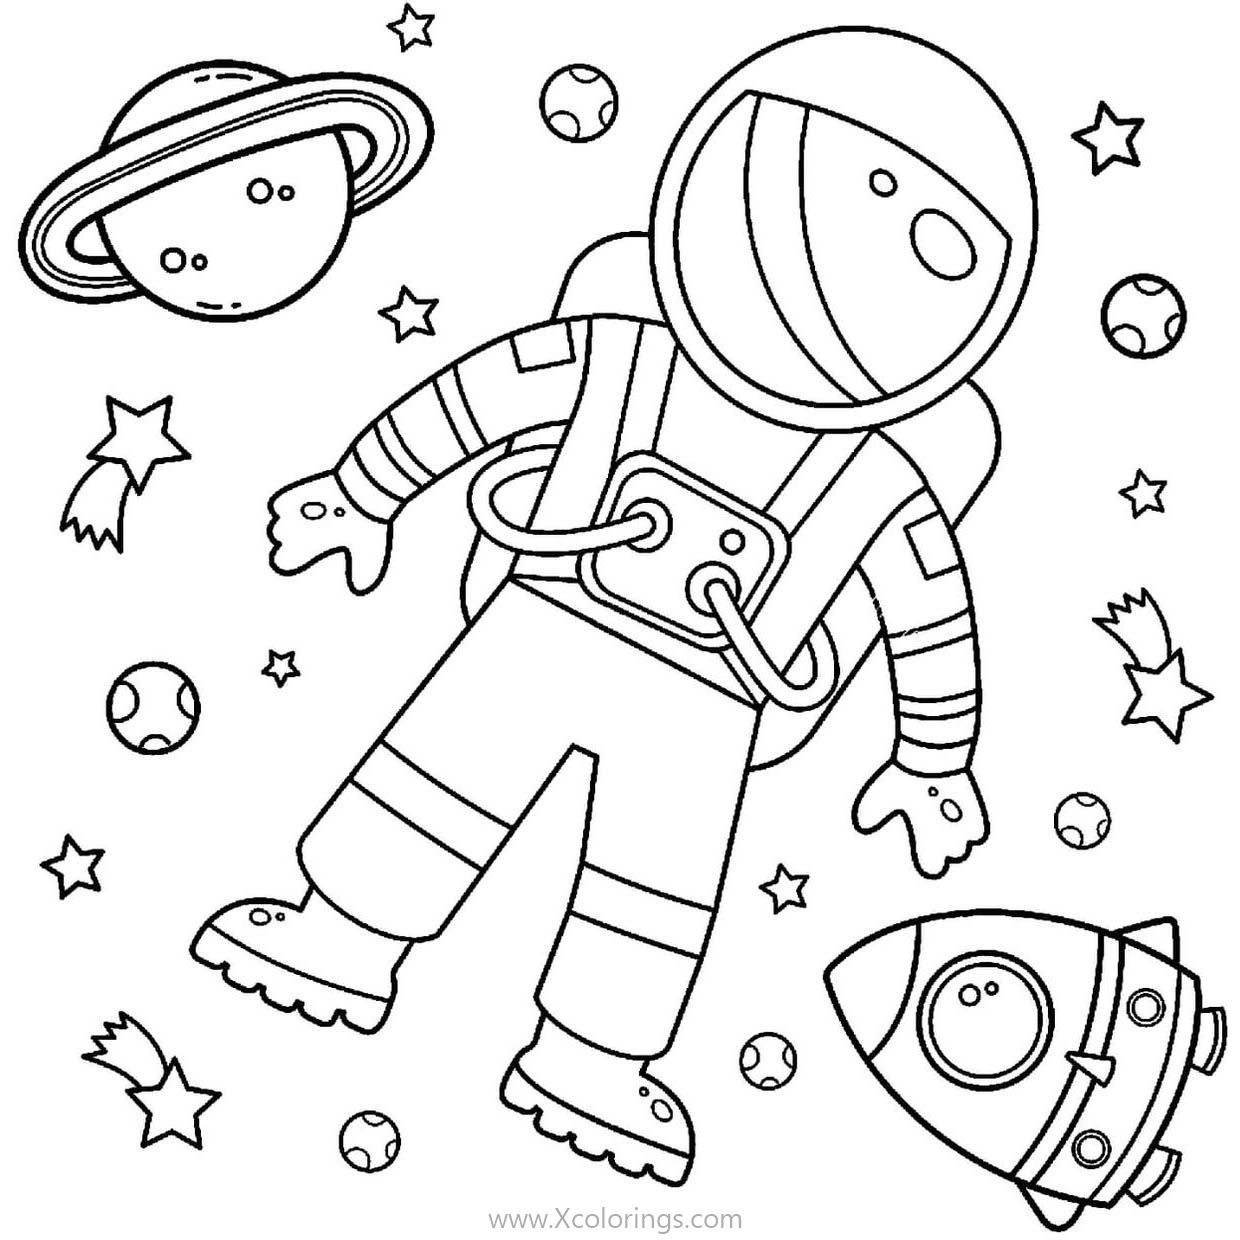 Free Cartoon Astronaut with Planets Coloring Pages printable